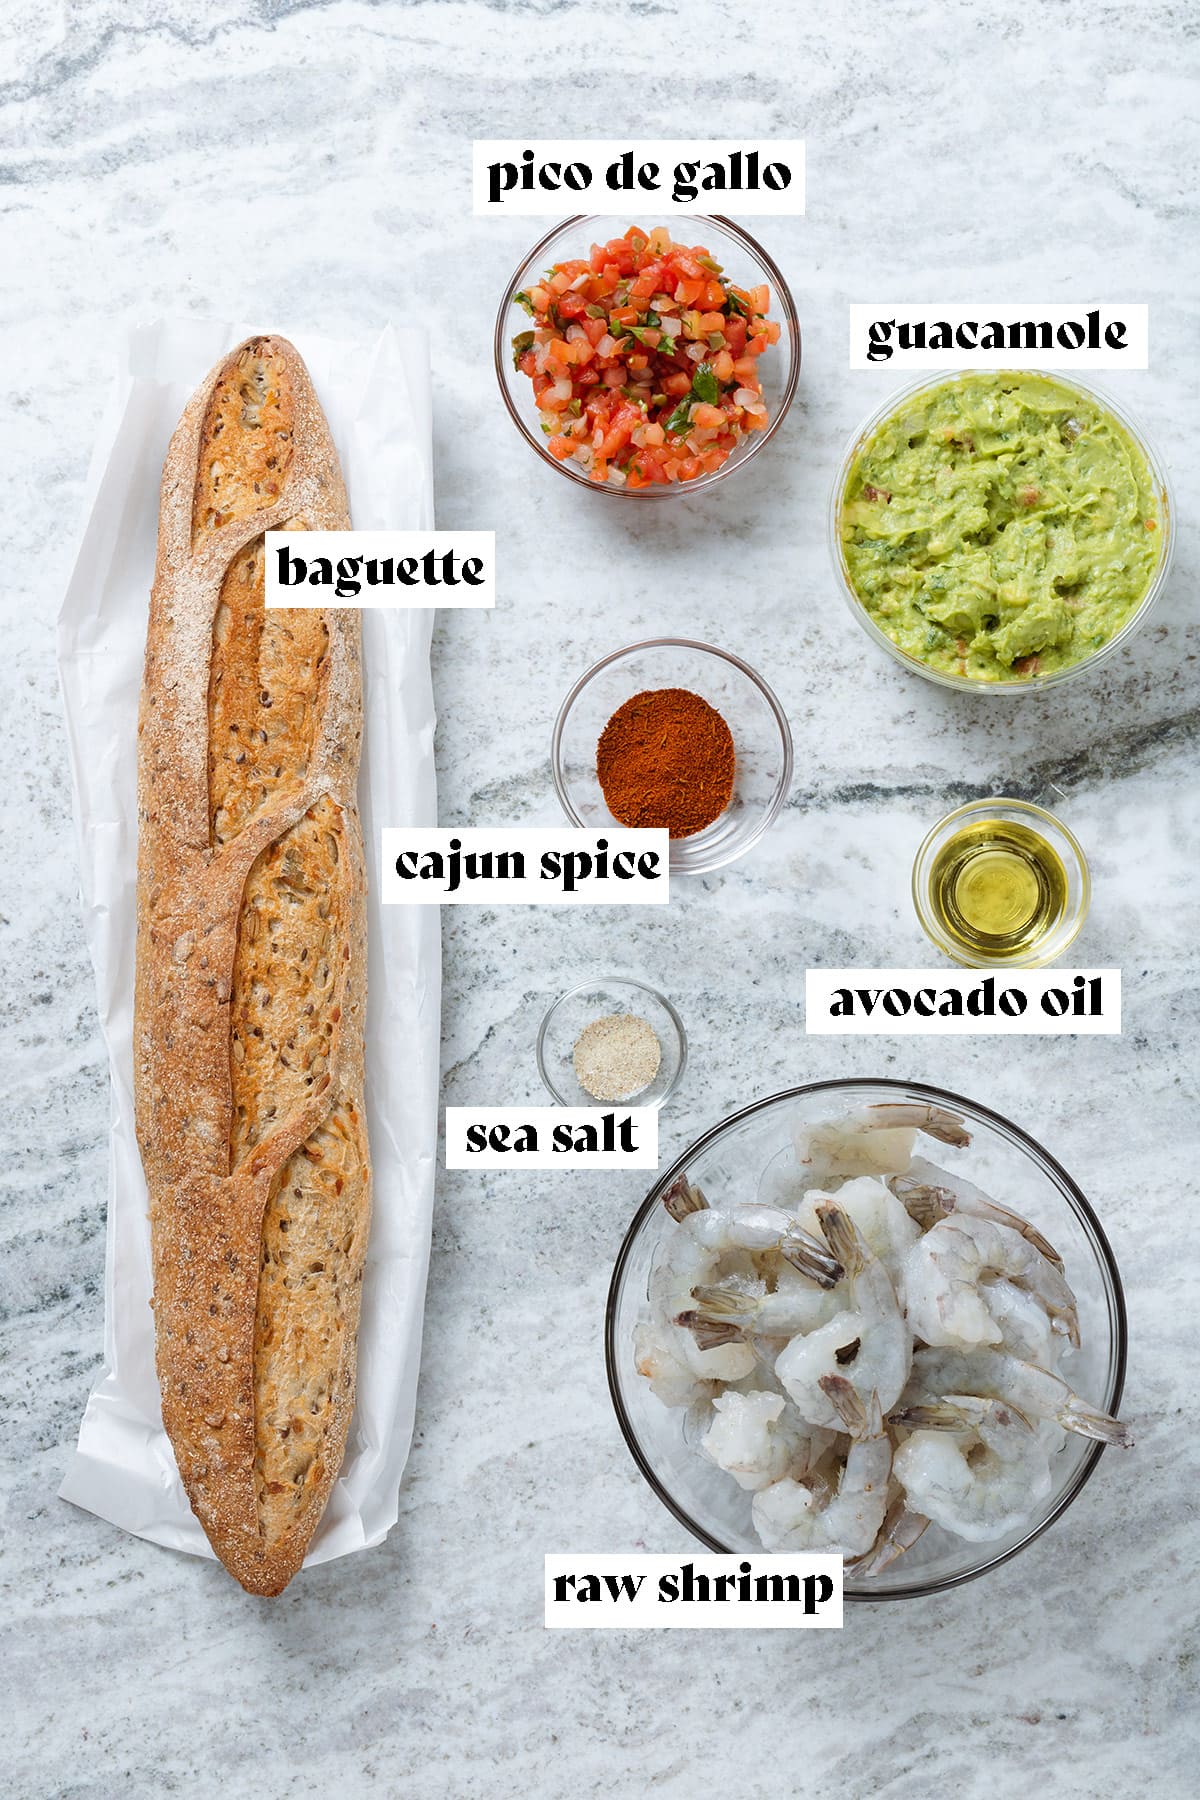 Baguette, raw shrimp, guacamole, fresh salsa, and spices laid out on a grey stone background with text overlay.